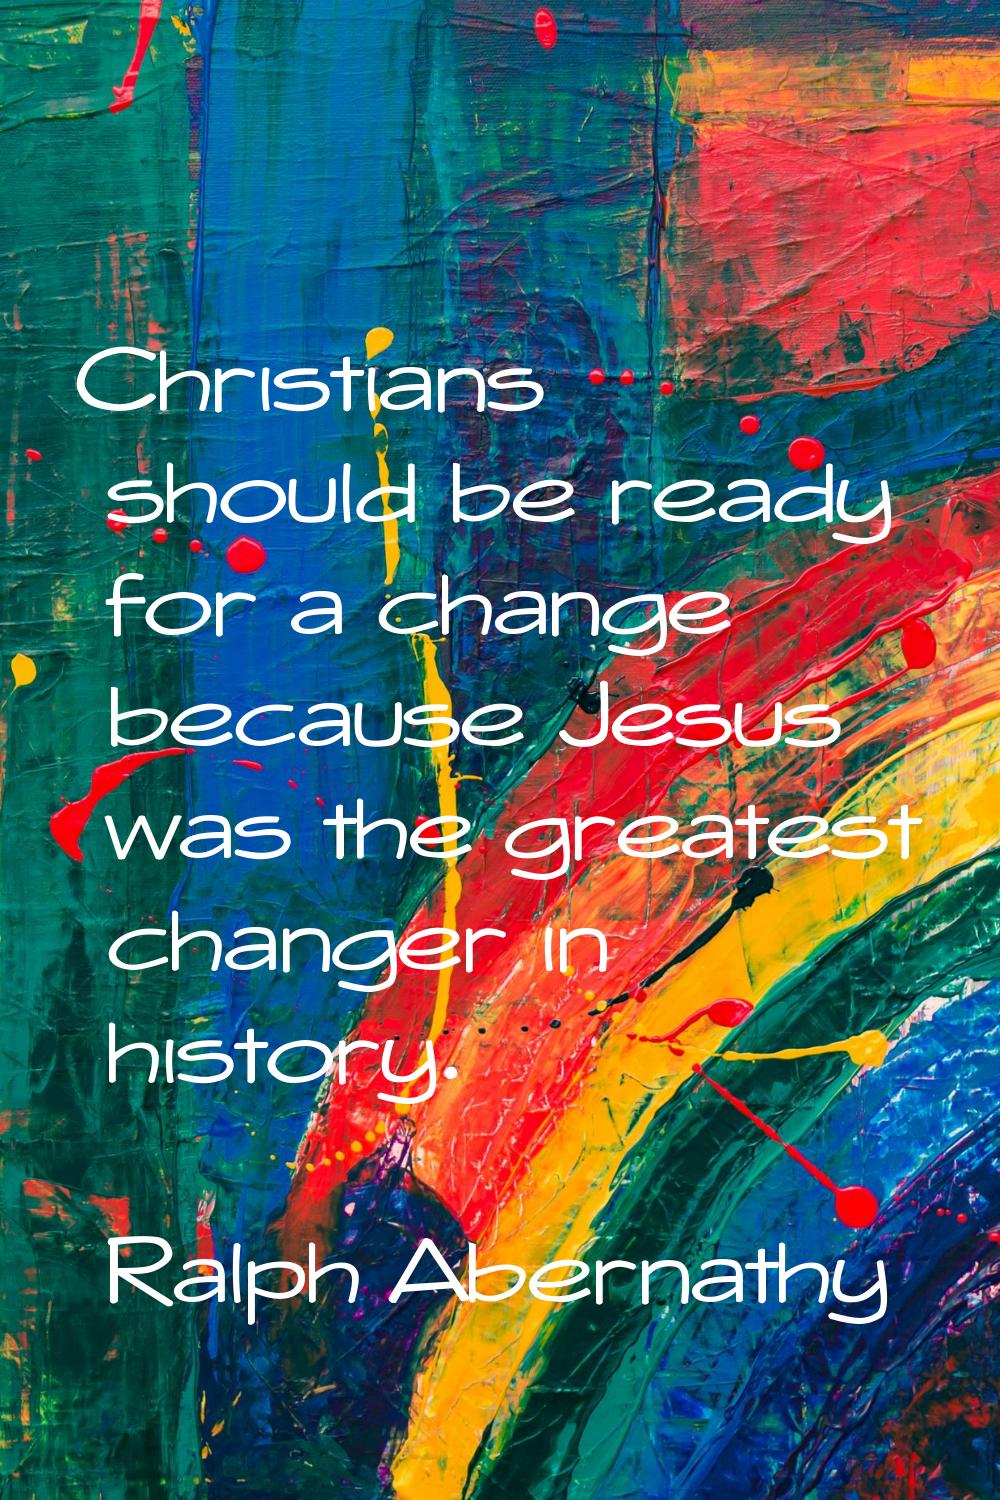 Christians should be ready for a change because Jesus was the greatest changer in history.